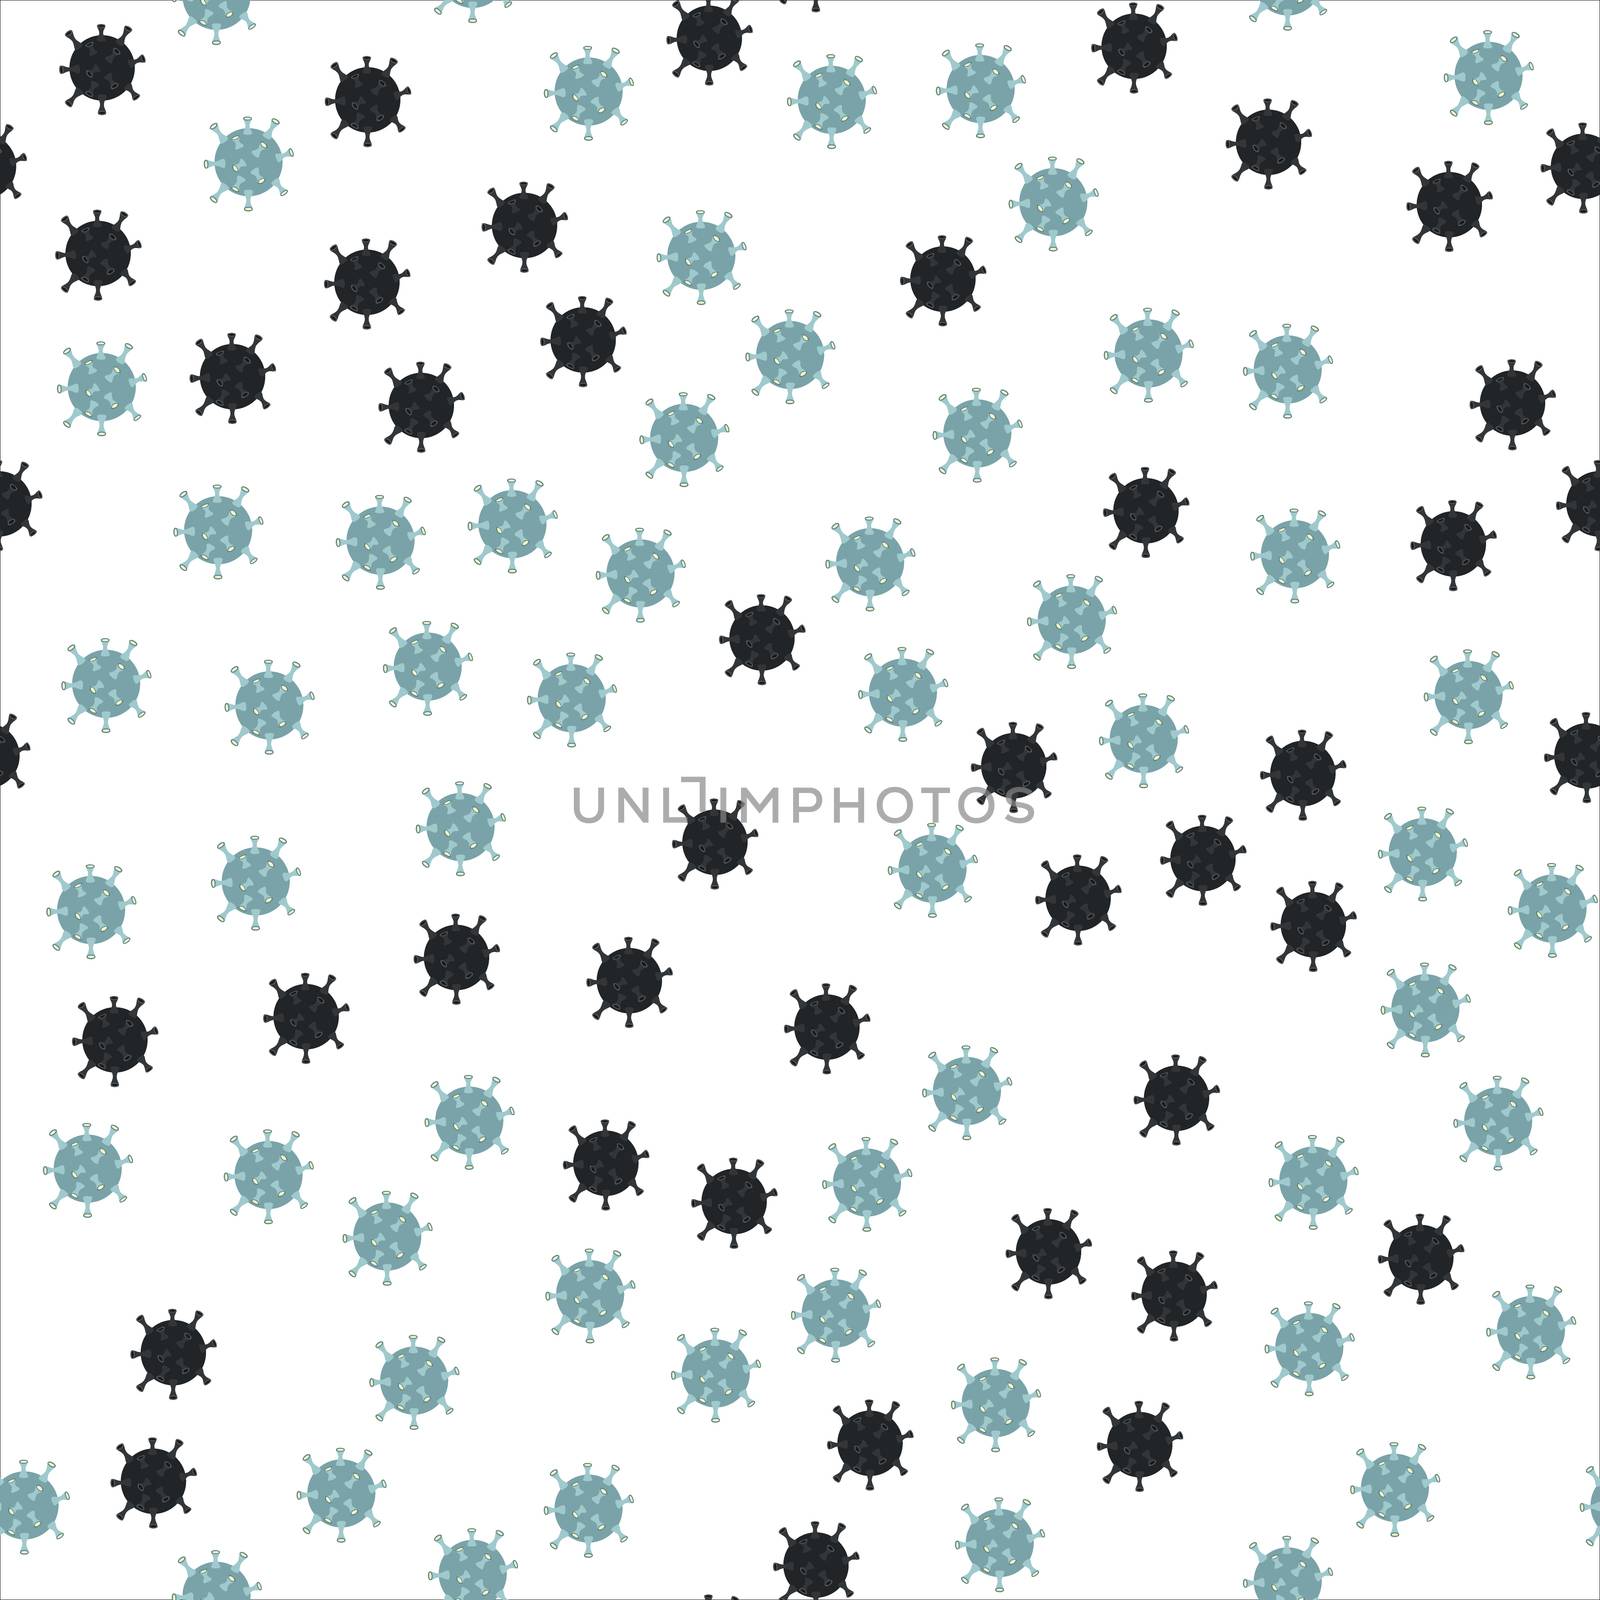 Seamless pattern with virus bacteria. Latest trend news, fashion bloggers post. Flat cartoon illustration with copyspace on white background. Vector illustration.